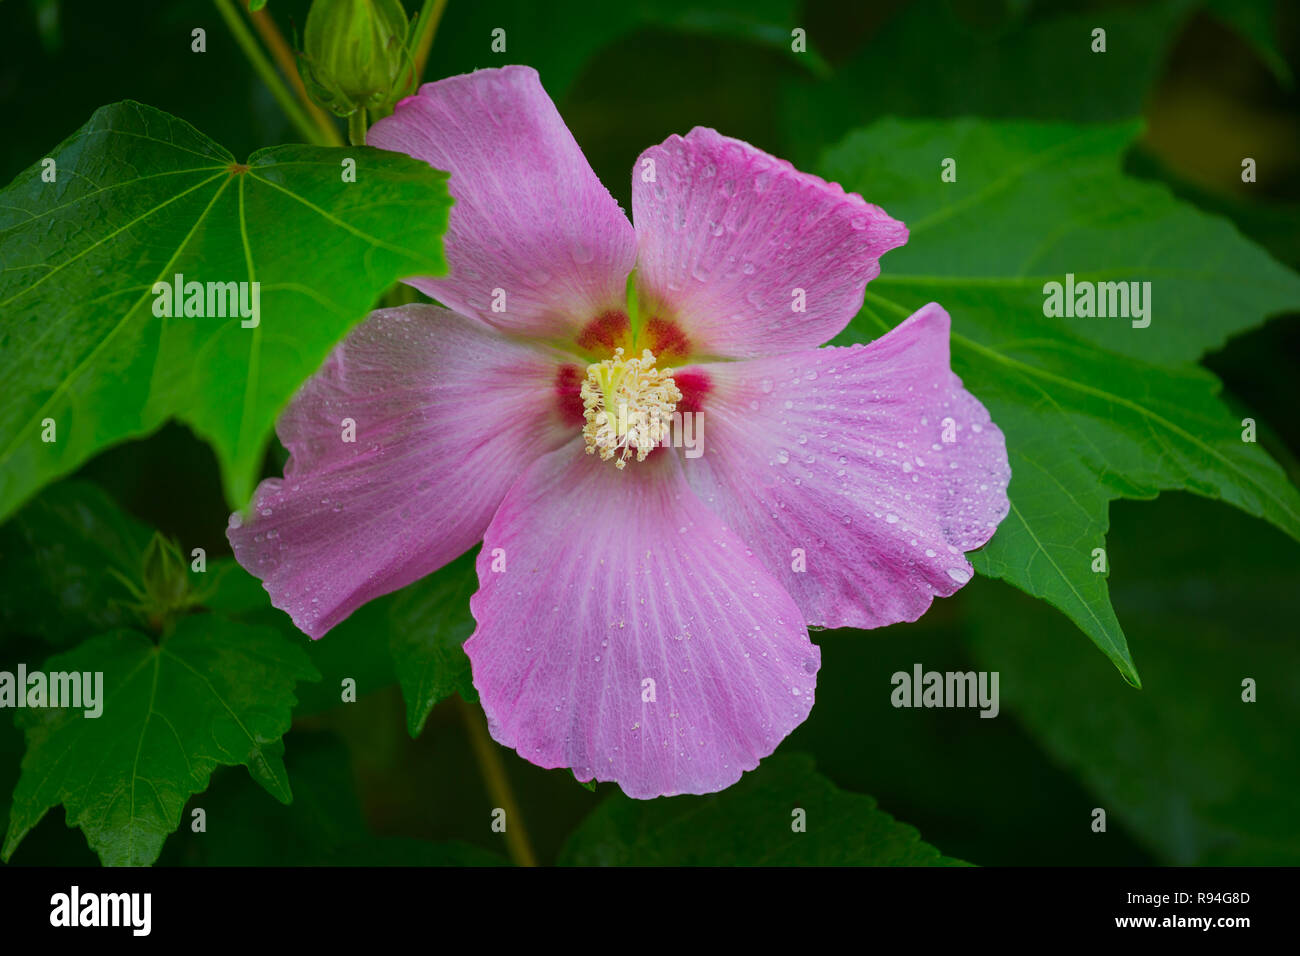 This beautiful purple flower called as Hibiscus moscheutos, rose mallow ...